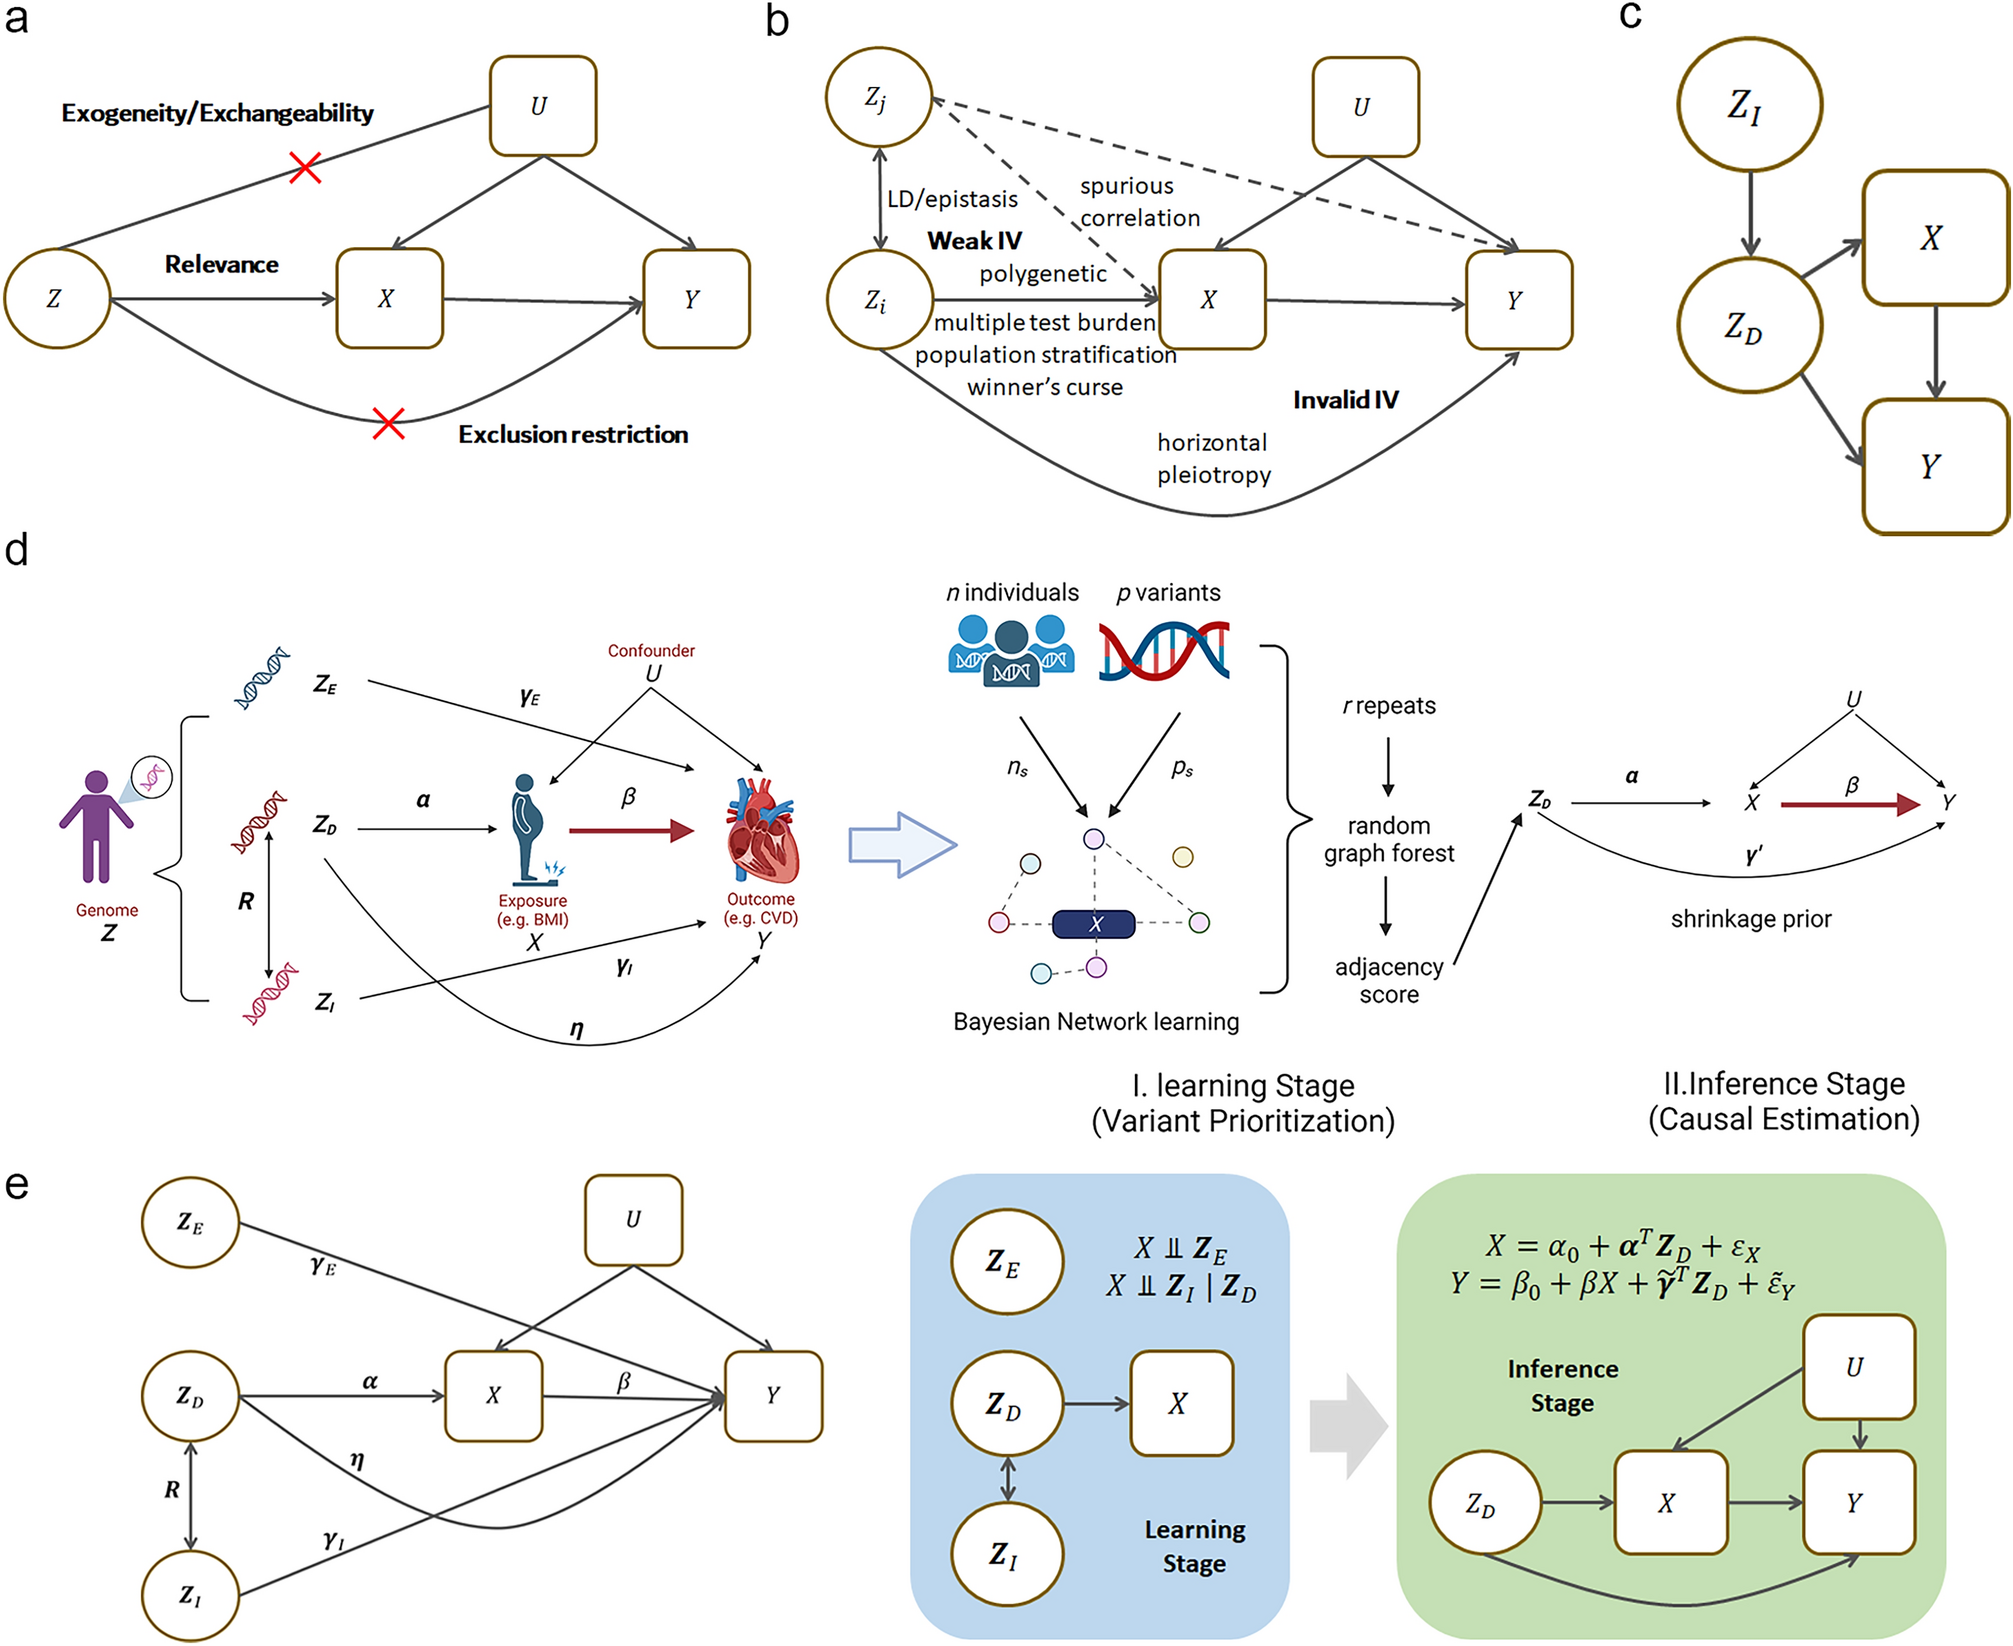 Bayesian network-based Mendelian randomization for variant prioritization and phenotypic causal inference